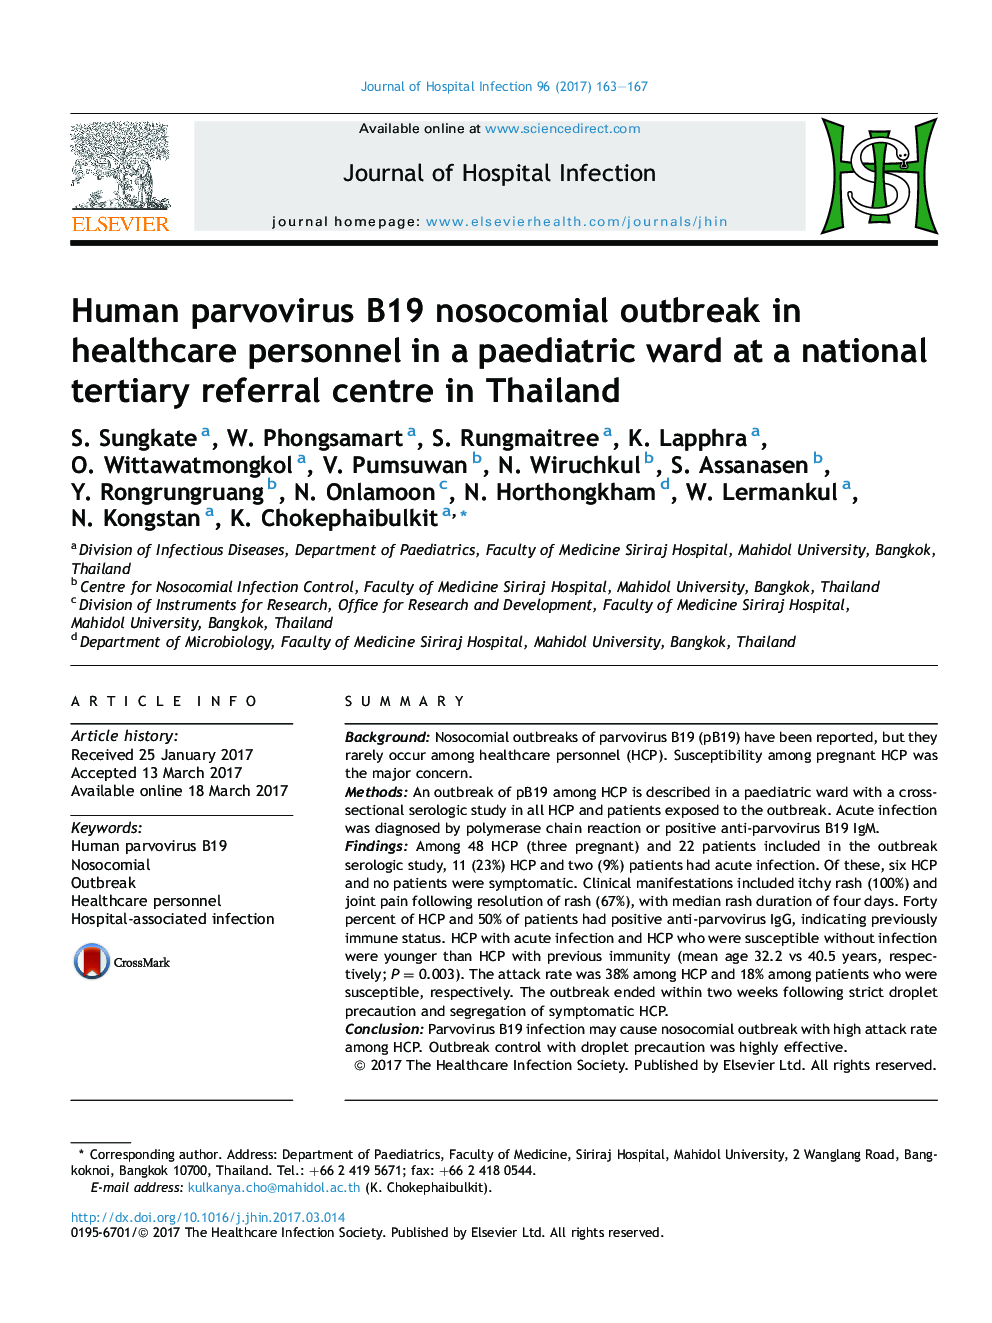 Human parvovirus B19 nosocomial outbreak in healthcare personnel in a paediatric ward at a national tertiary referral centre in Thailand